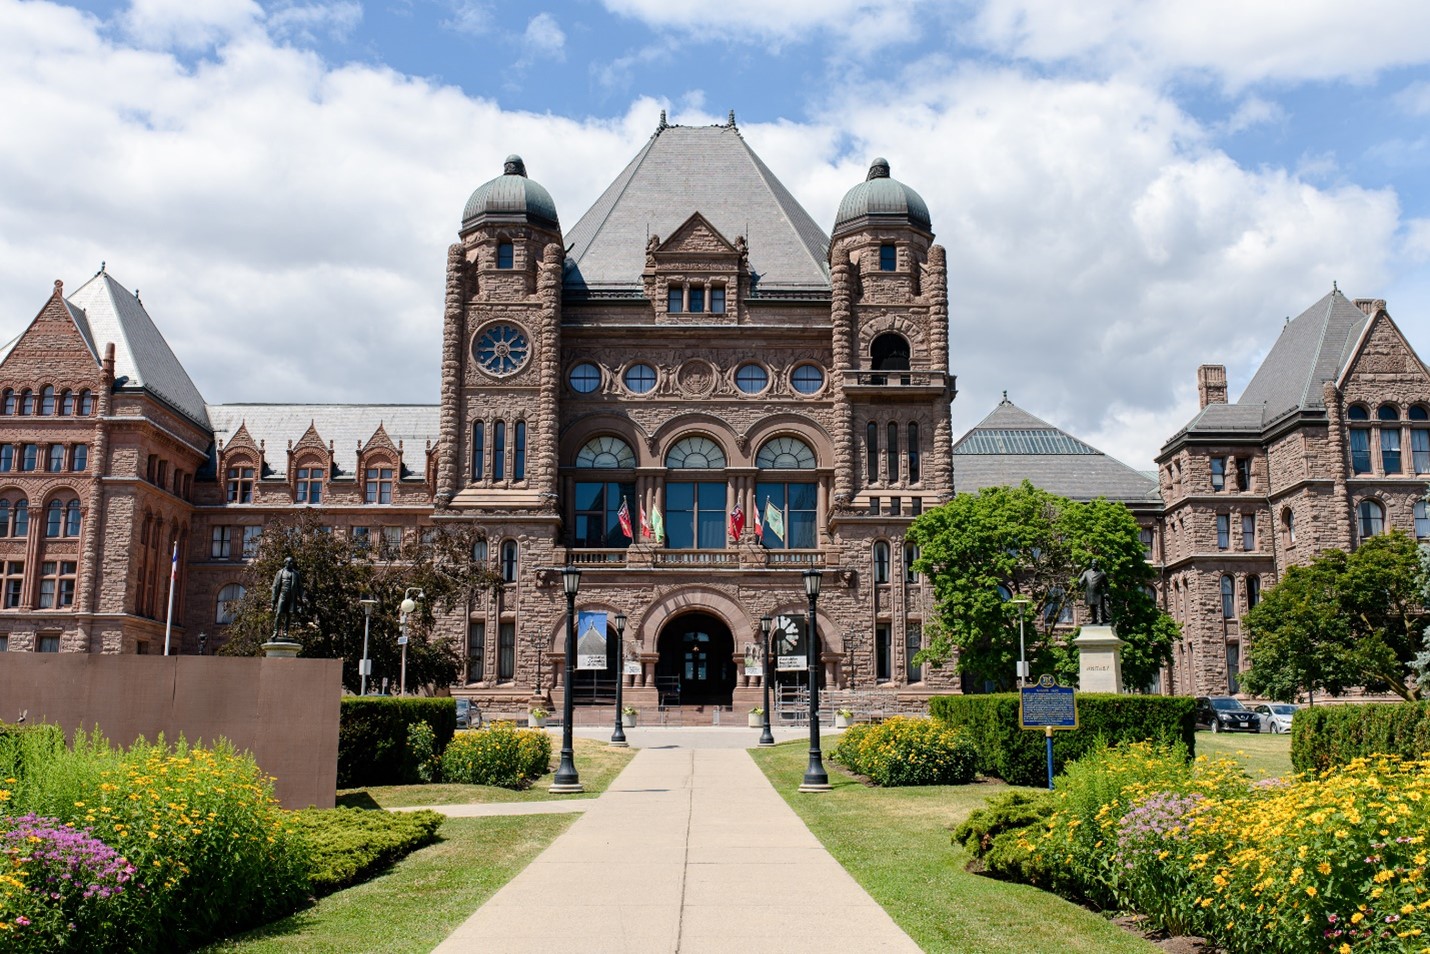 Queen's Park in Toronto, on a background of blue sky and clouds.